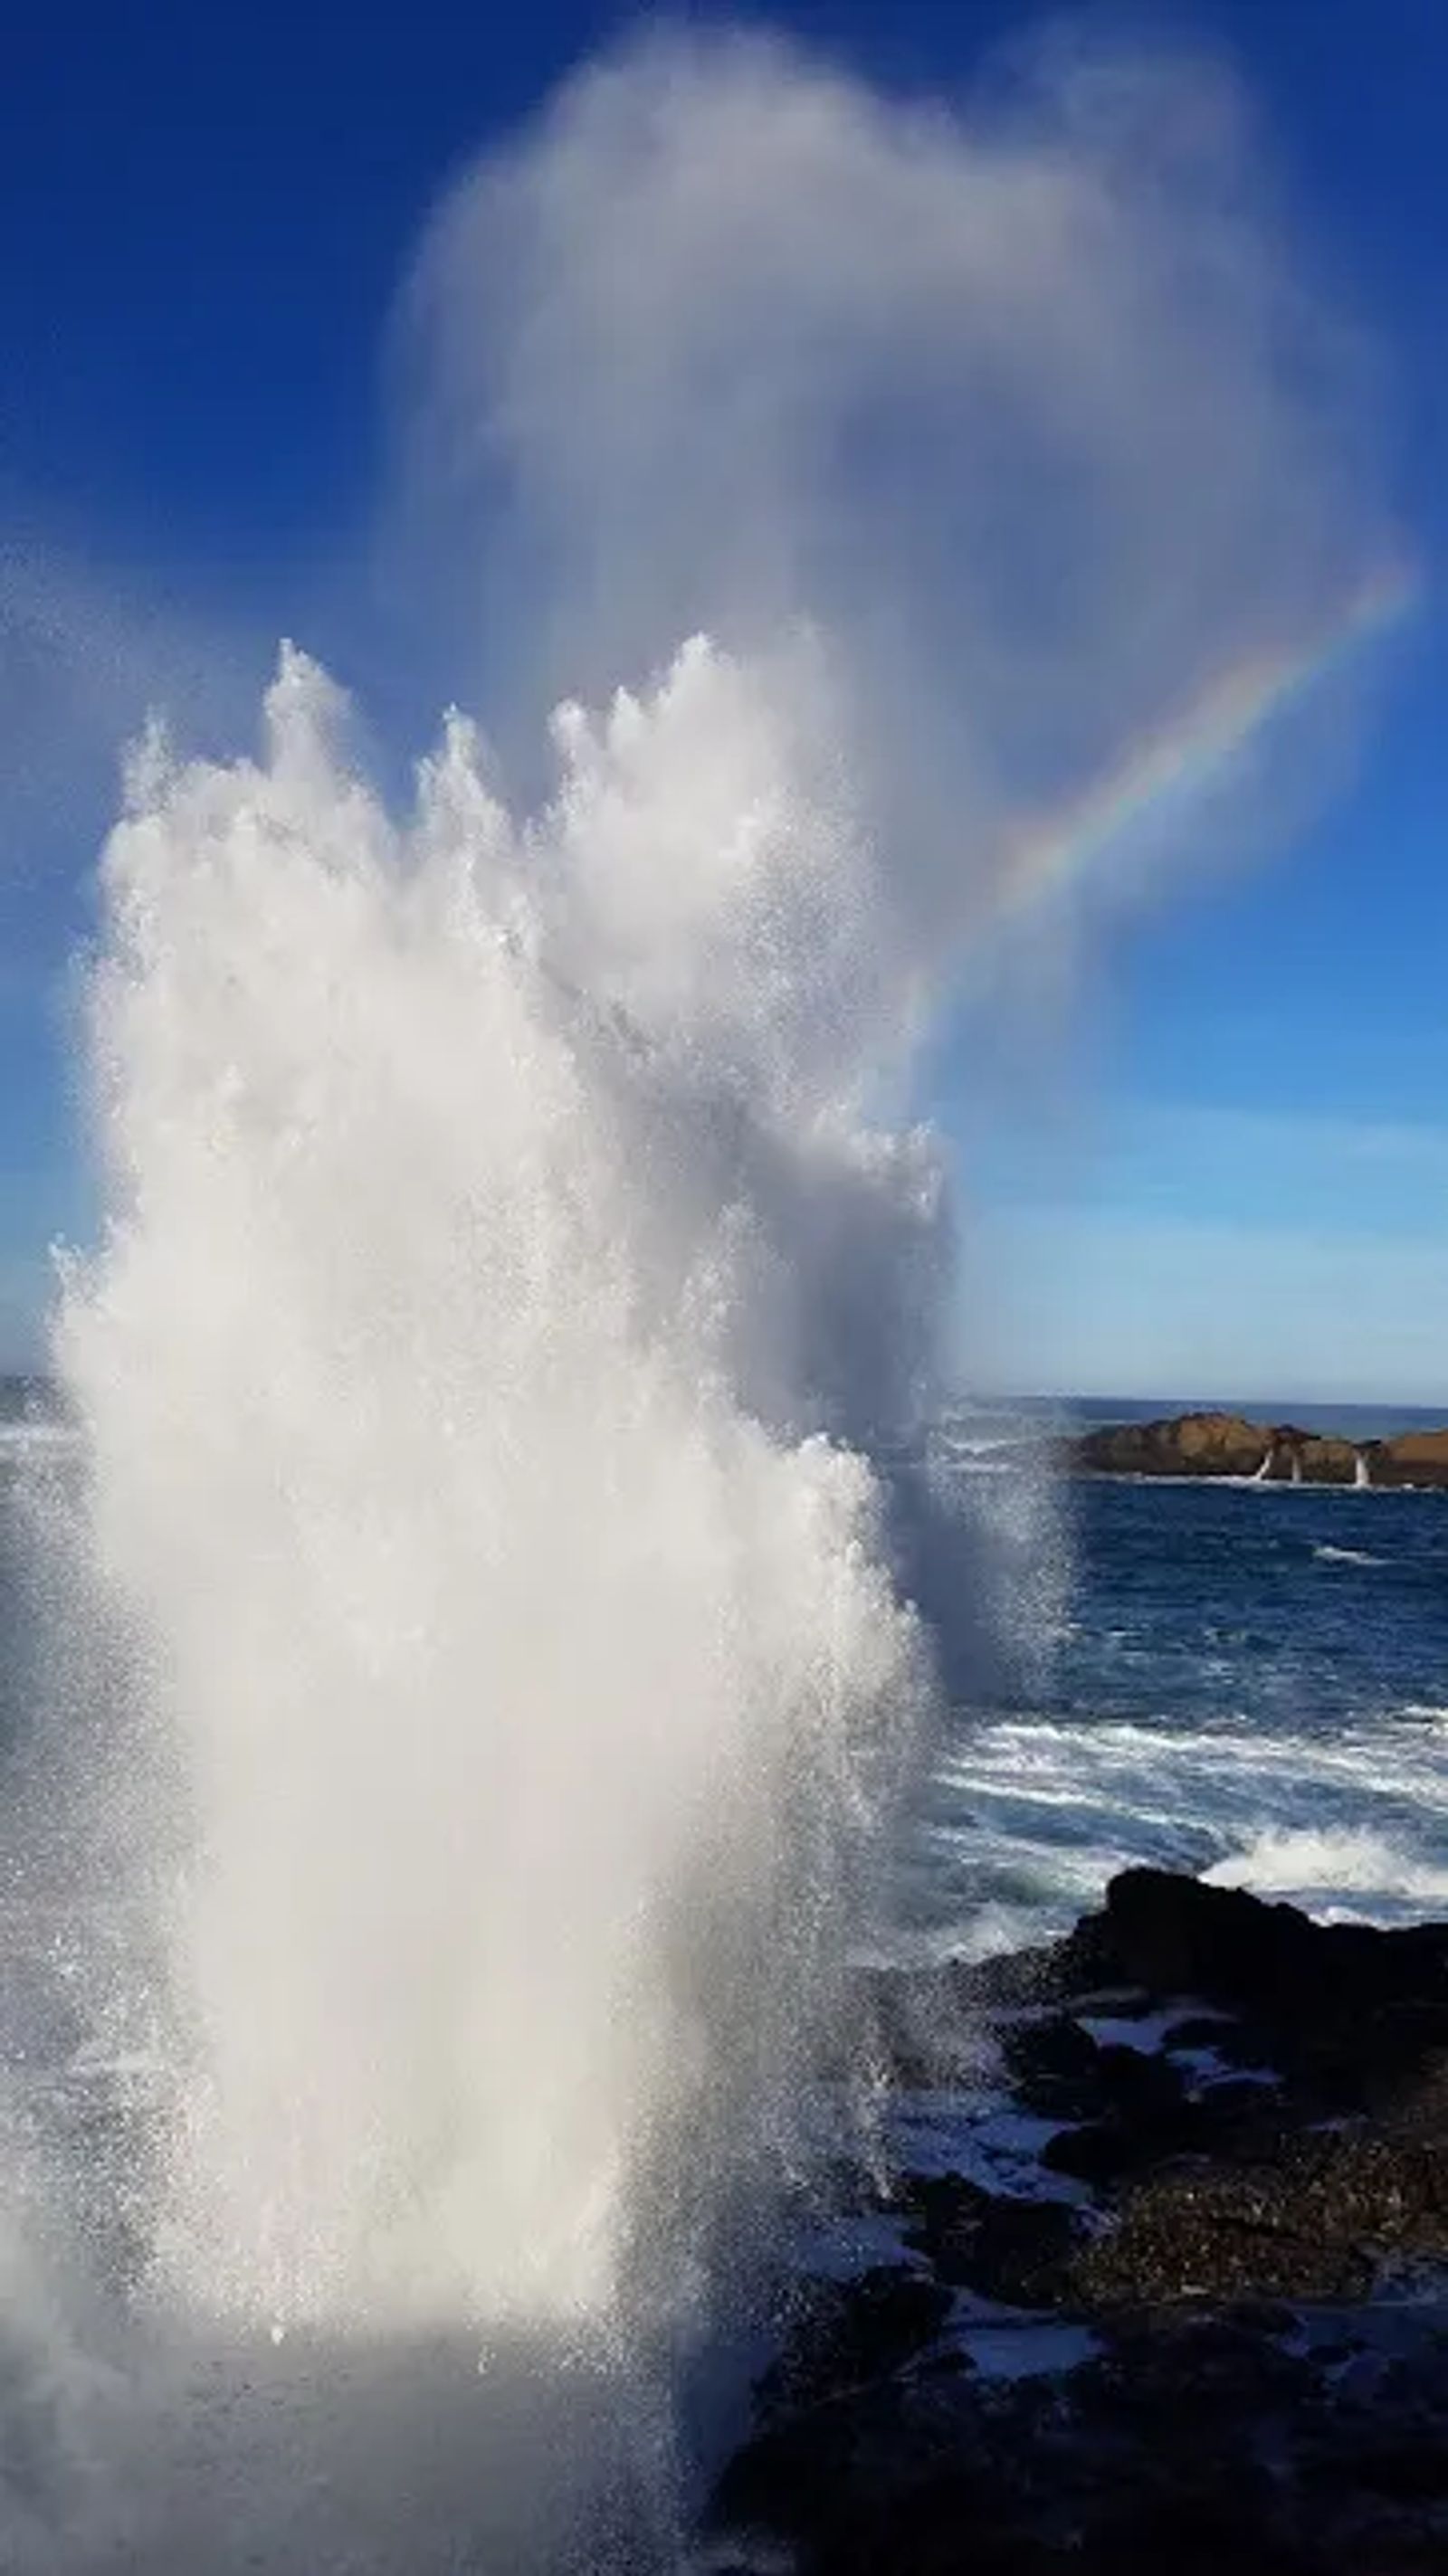 Photo of a water spout and rainbow from the surf in Depoe Bay, Oregon